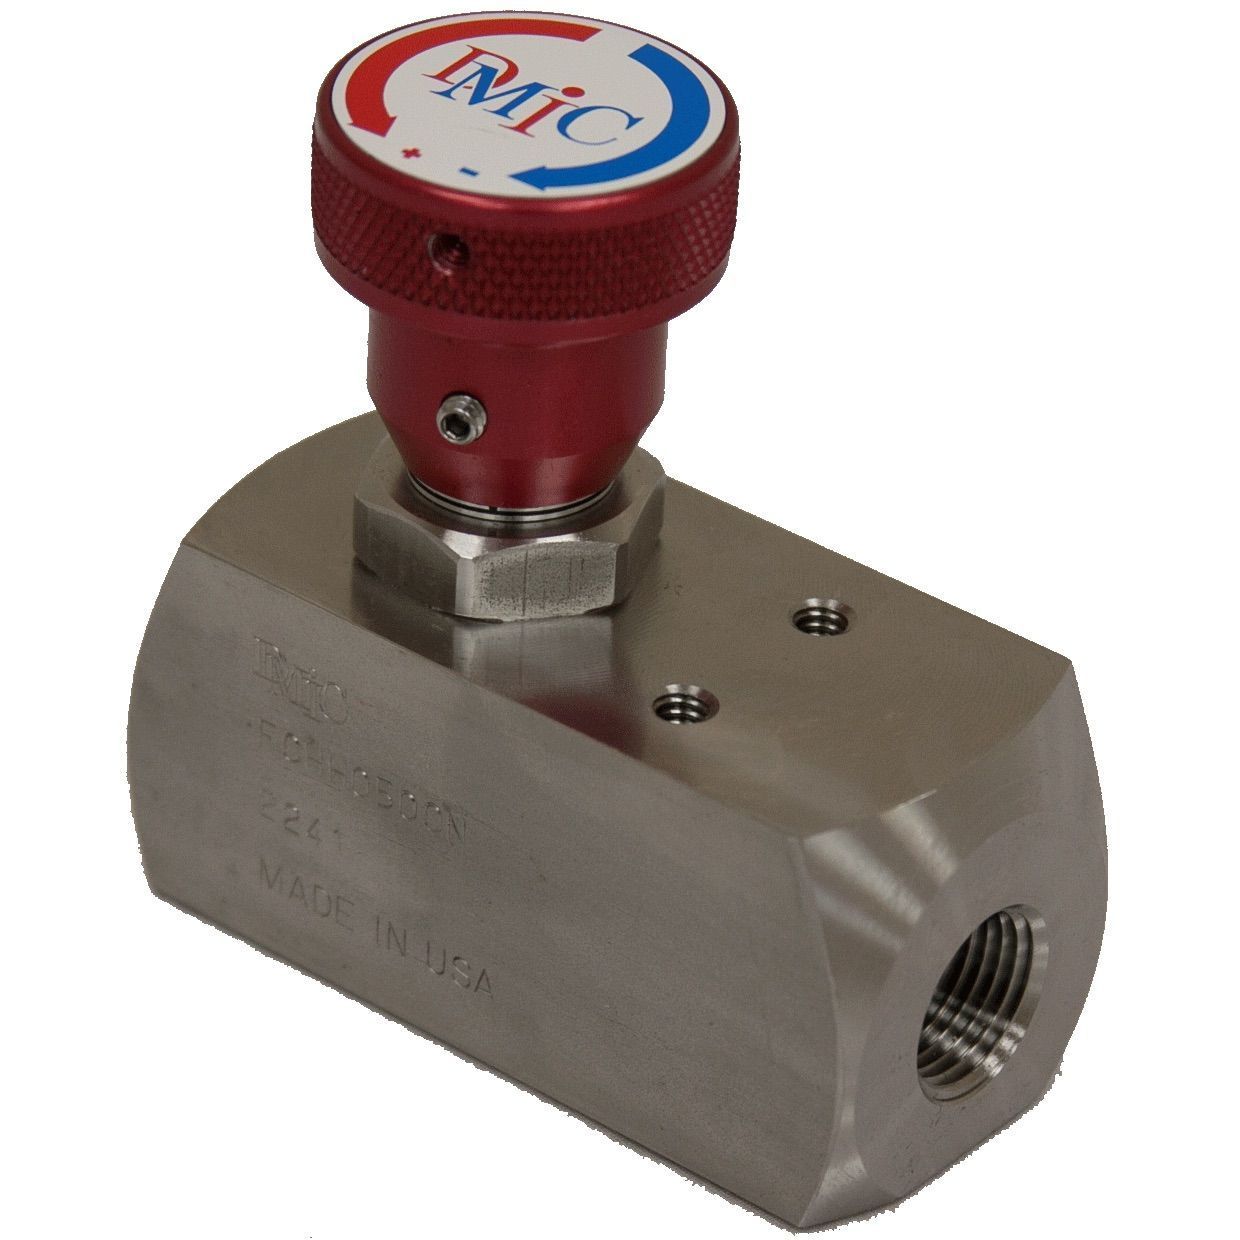 FCHH-0375S-2221 : DMIC Flow Control, Unidirectional, with Integrated Check, #6 SAE (3/8"), 316SS, 10000psi